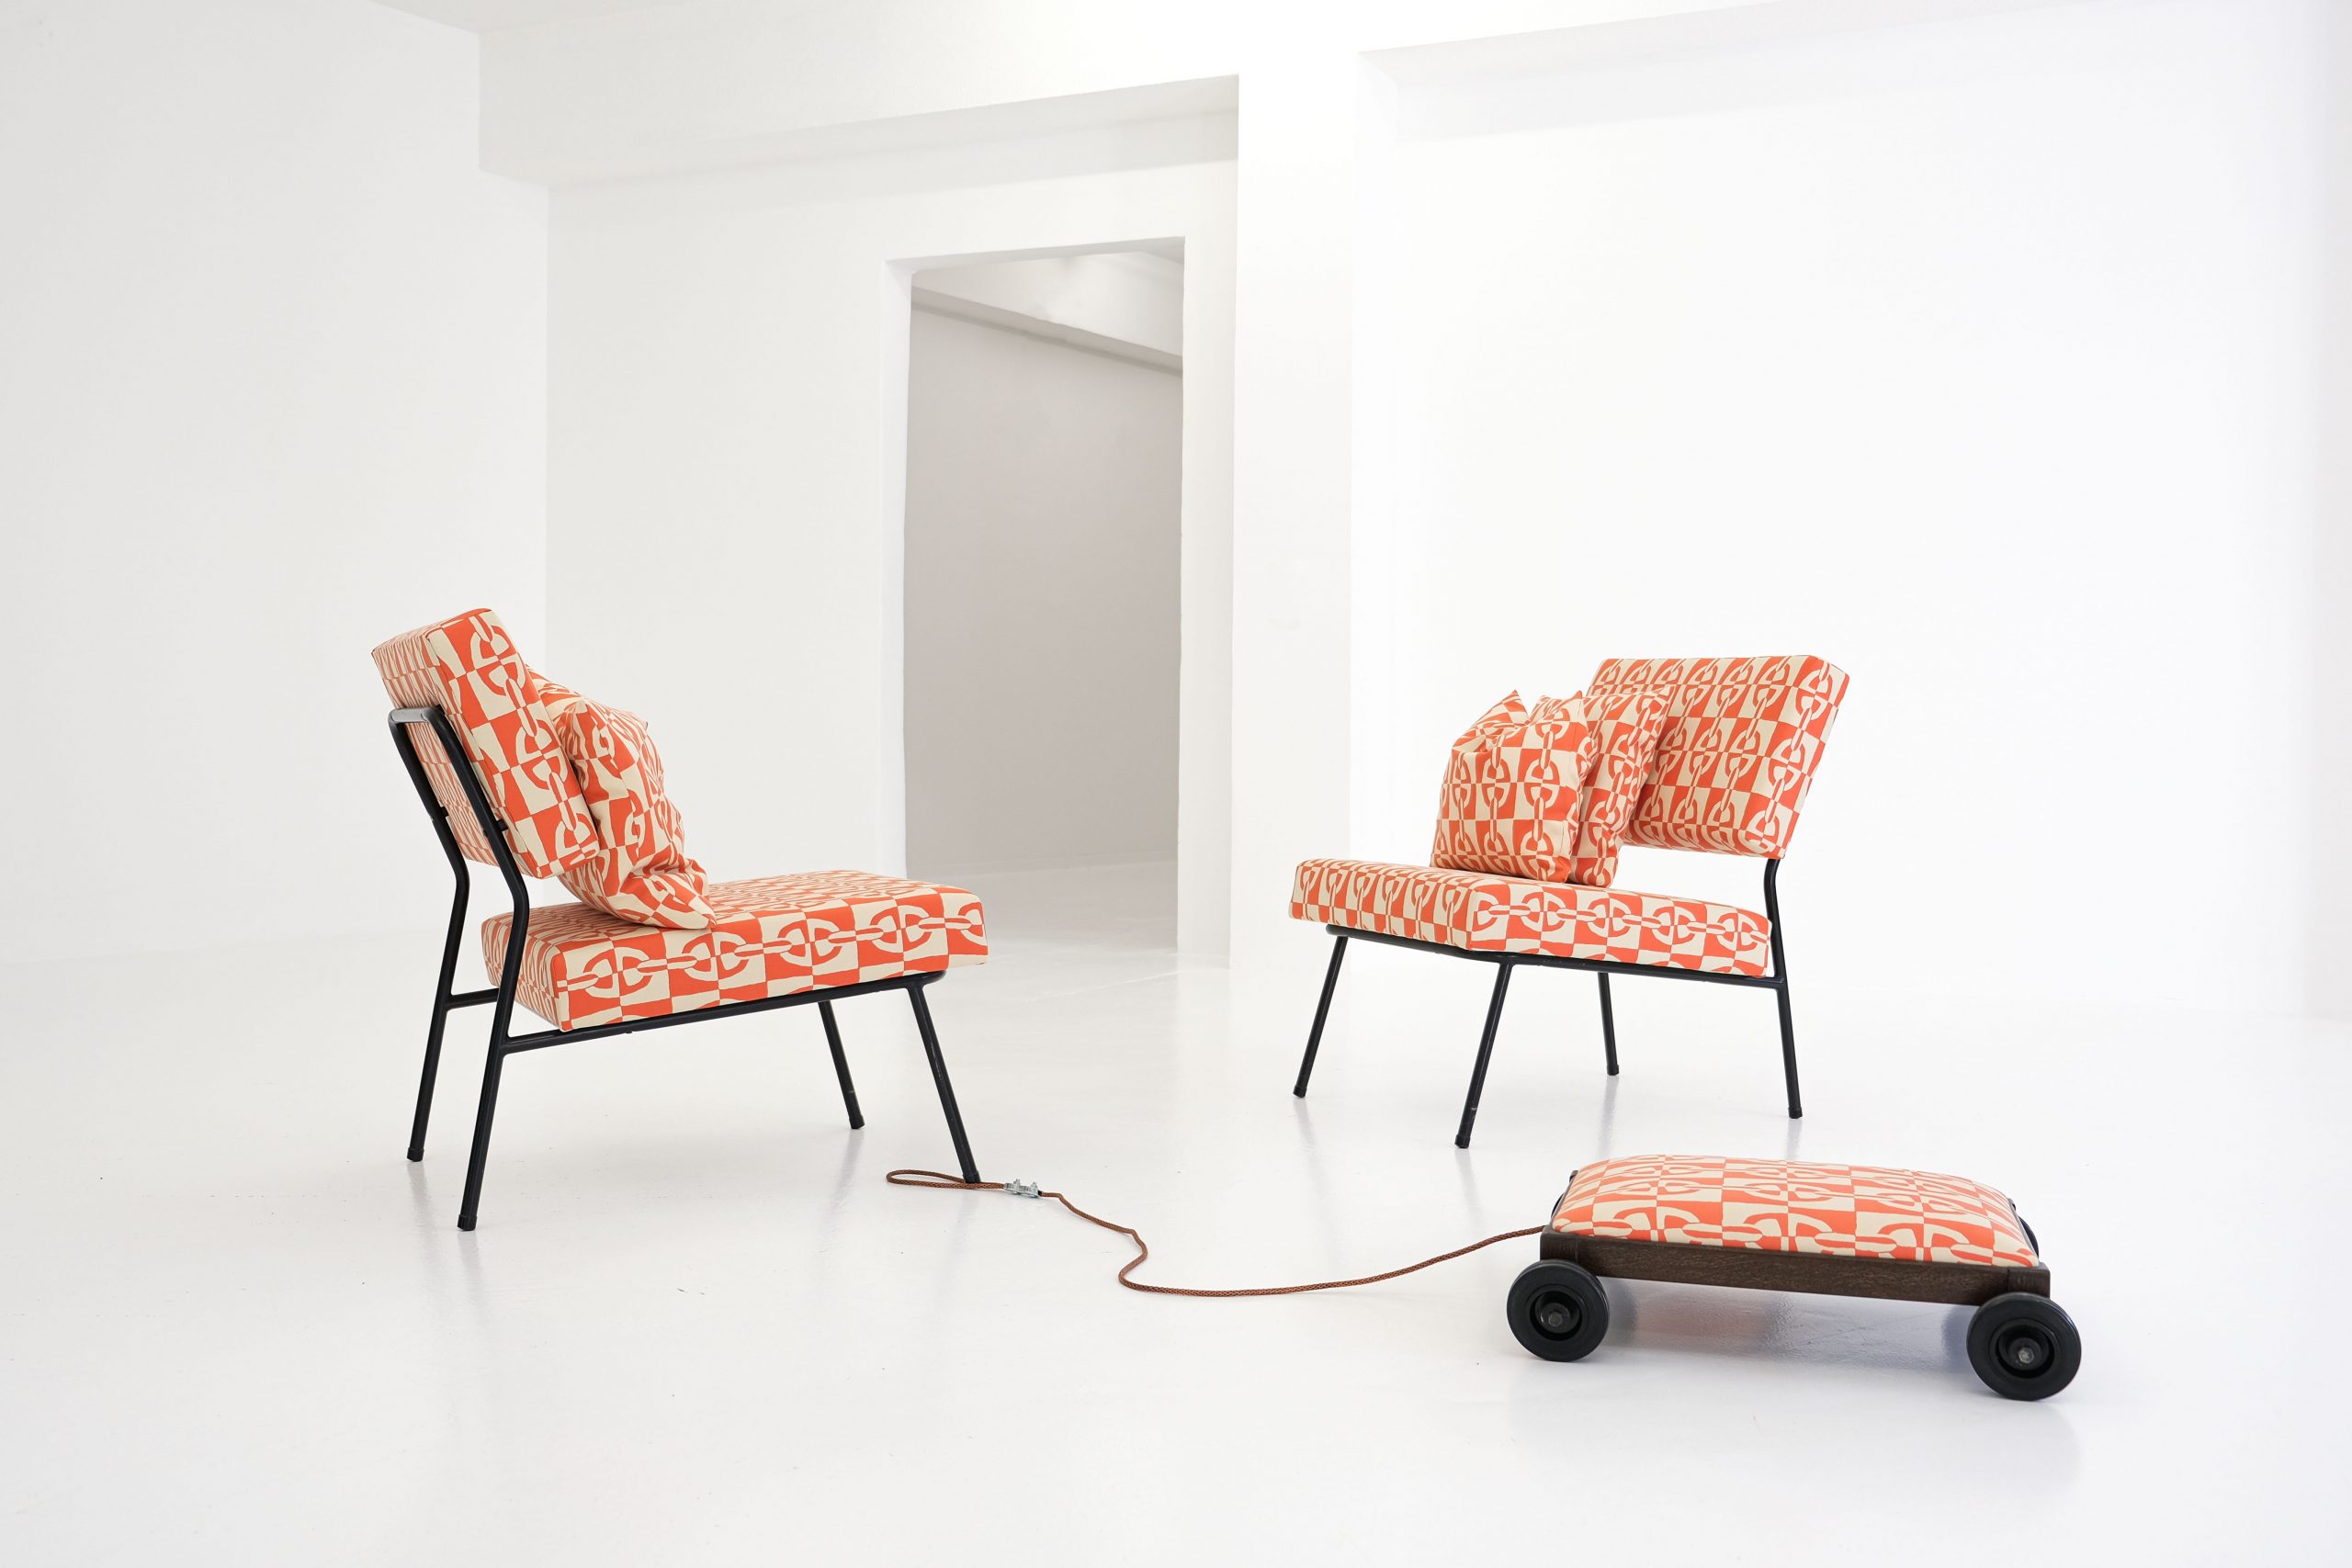 Poul Geoffrey, airborne, chairs, Hermés fabric, chain d'andre